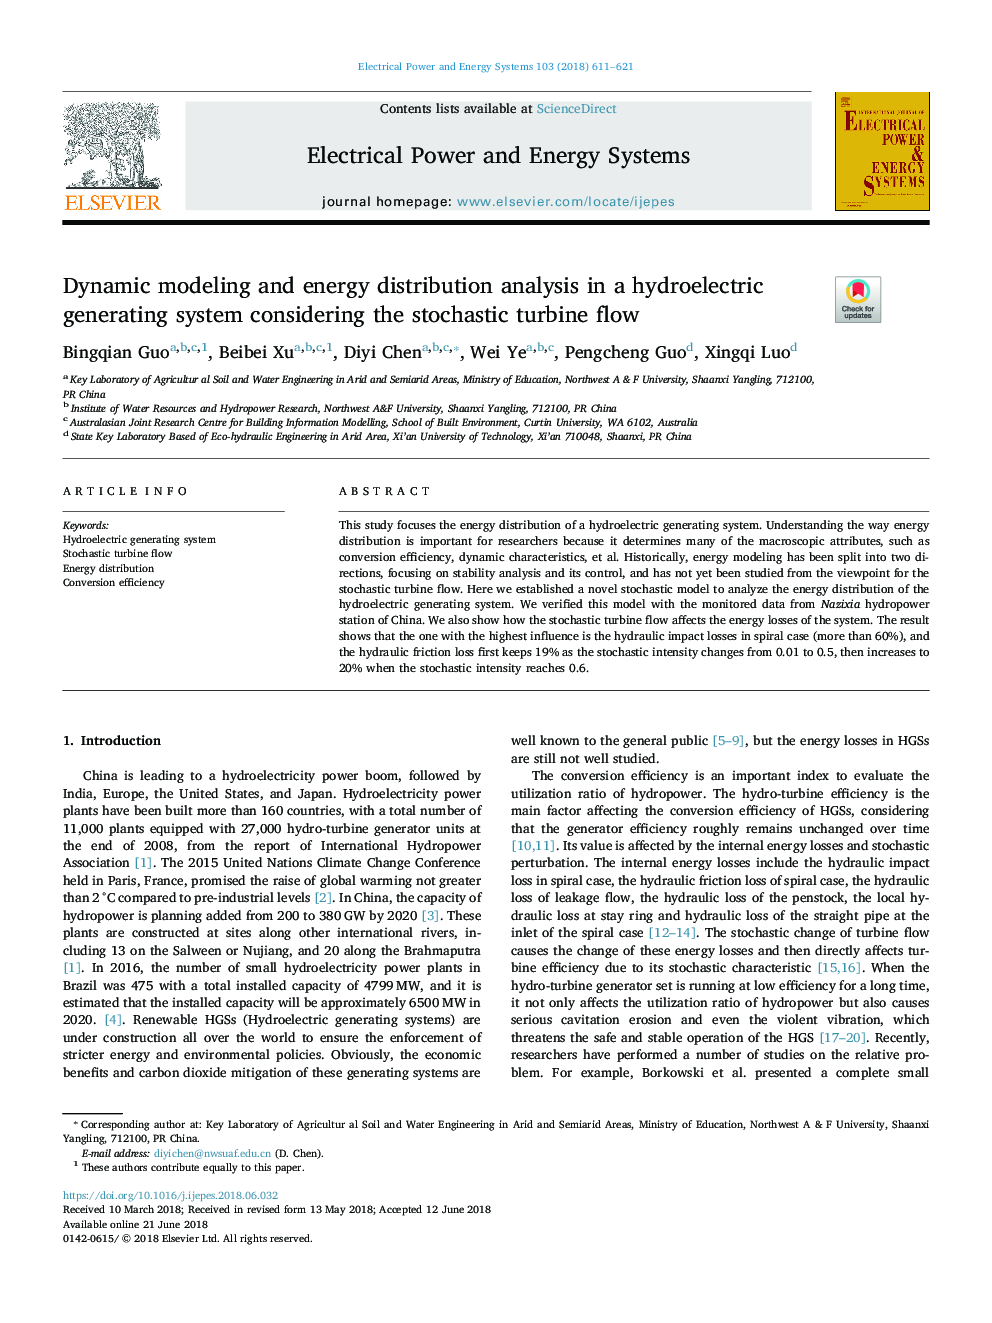 Dynamic modeling and energy distribution analysis in a hydroelectric generating system considering the stochastic turbine flow